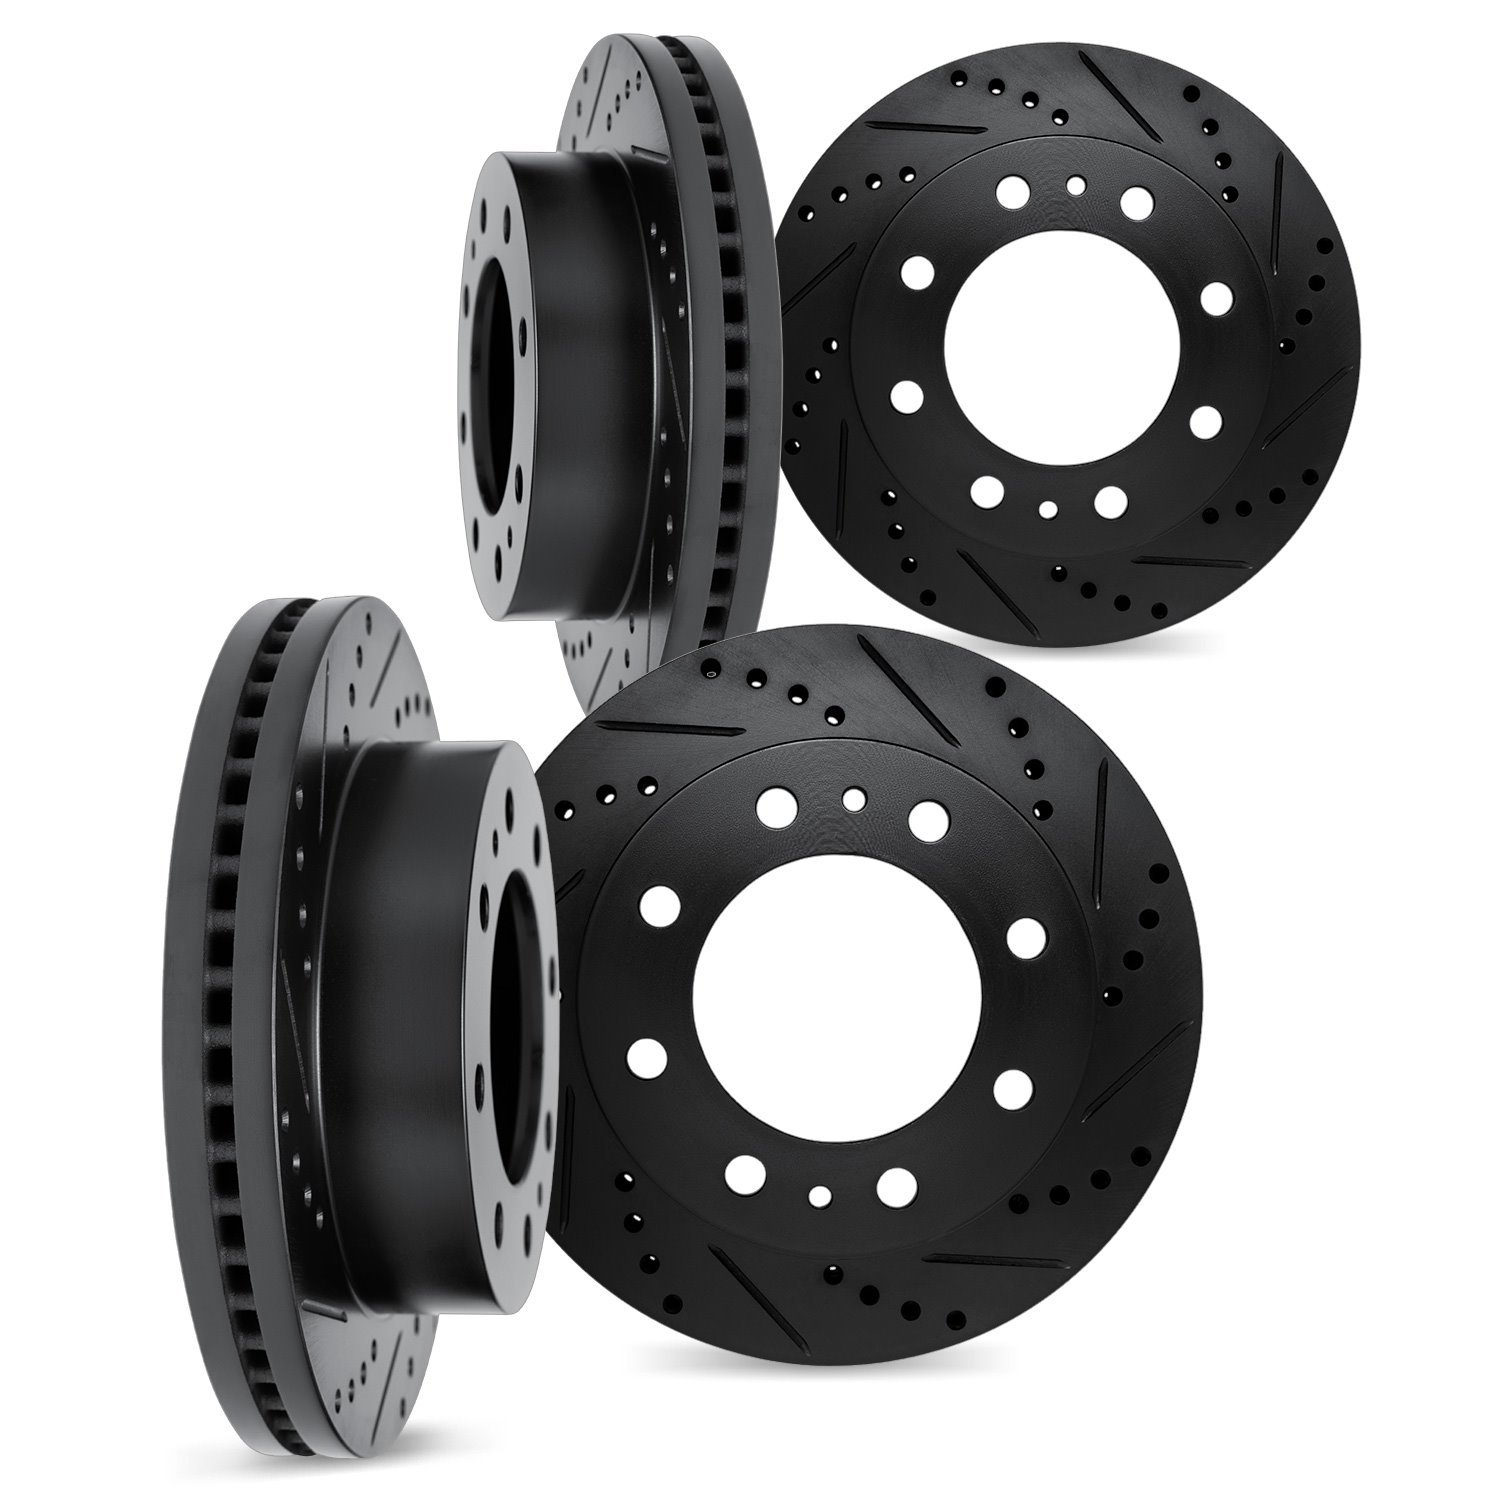 8004-48101 Drilled/Slotted Brake Rotors [Black], Fits Select GM, Position: Front and Rear